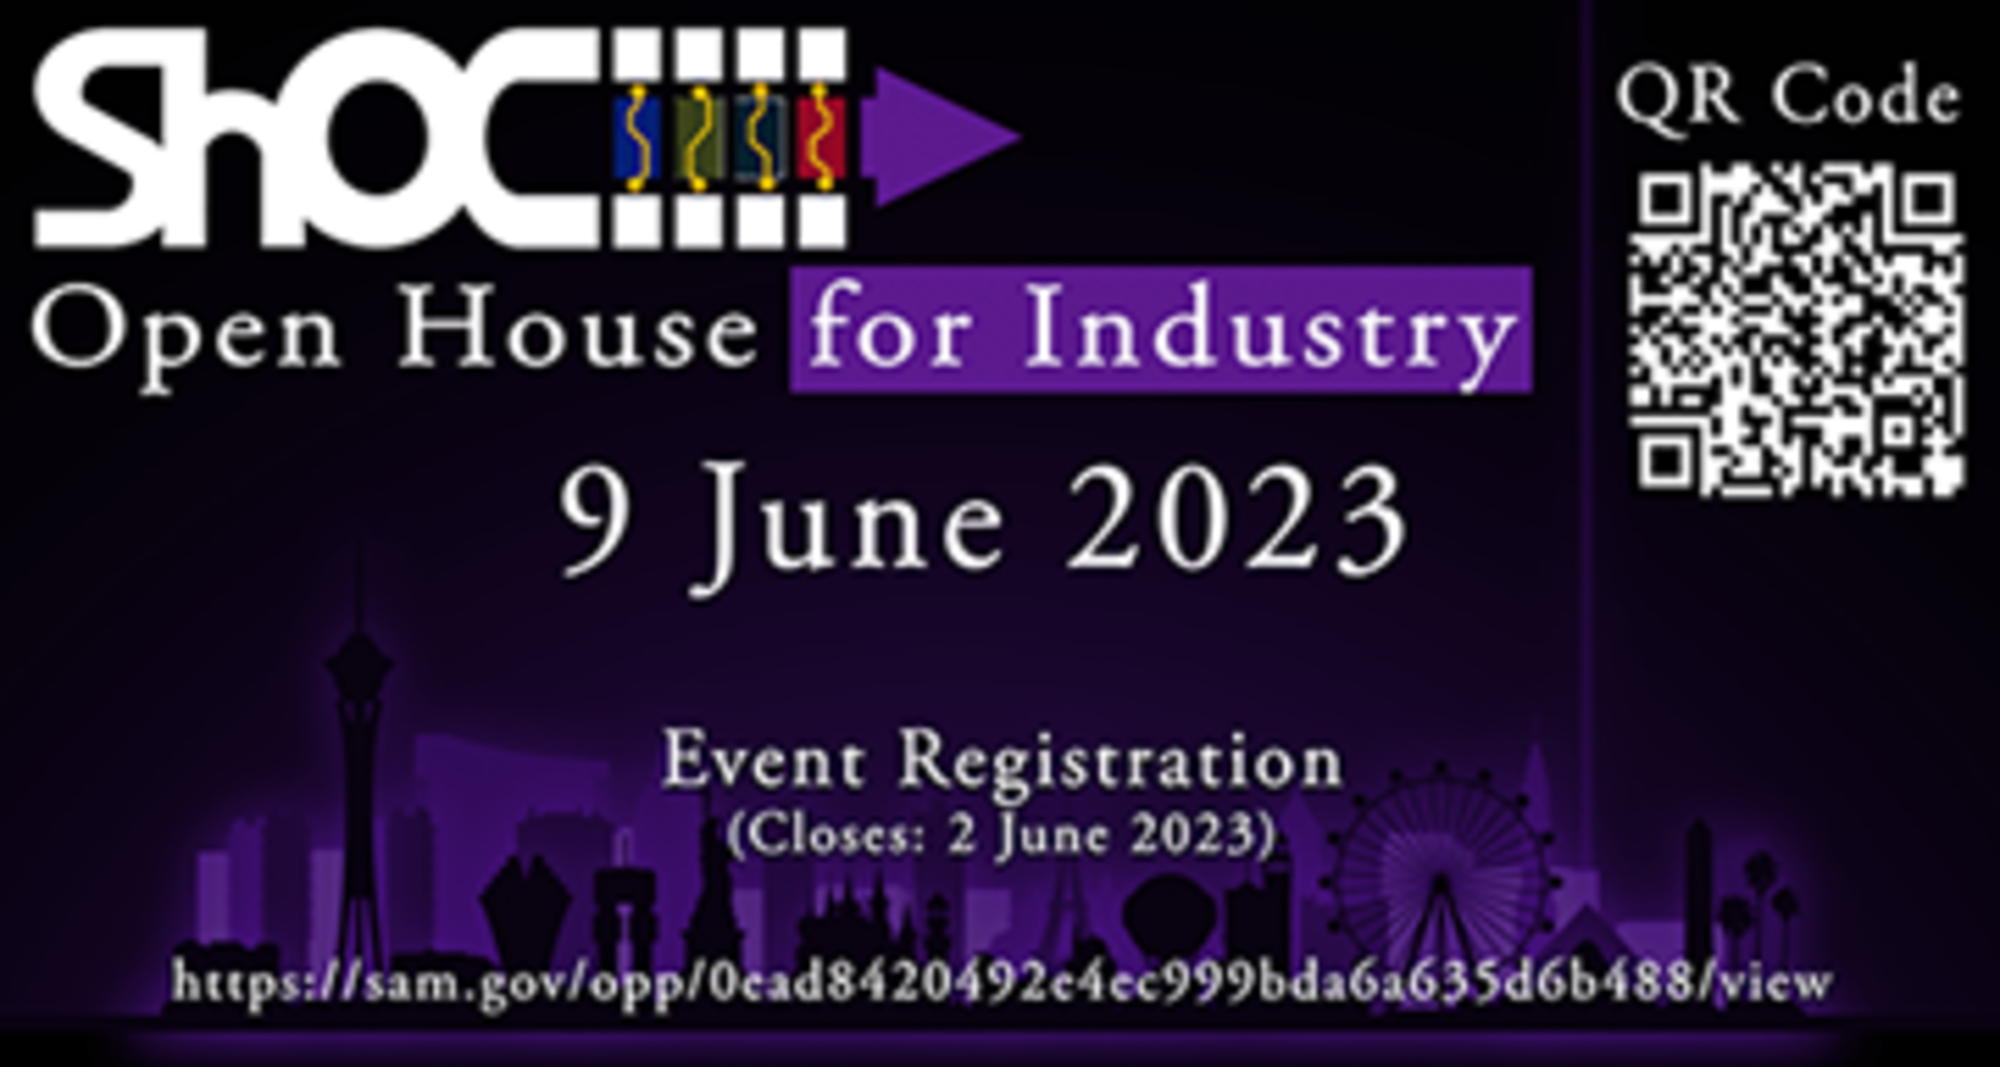 graphic with ShOC Open House for Industry event on 9 June 2023, event registration closes 2 June 2023.  A link to register is https://sam.gov/opp/0ead8420492e4ec999bda6a635d6b488/view and linked through a QR code also  The graphic background is dark with light purple highlighting a silhouetted city outline